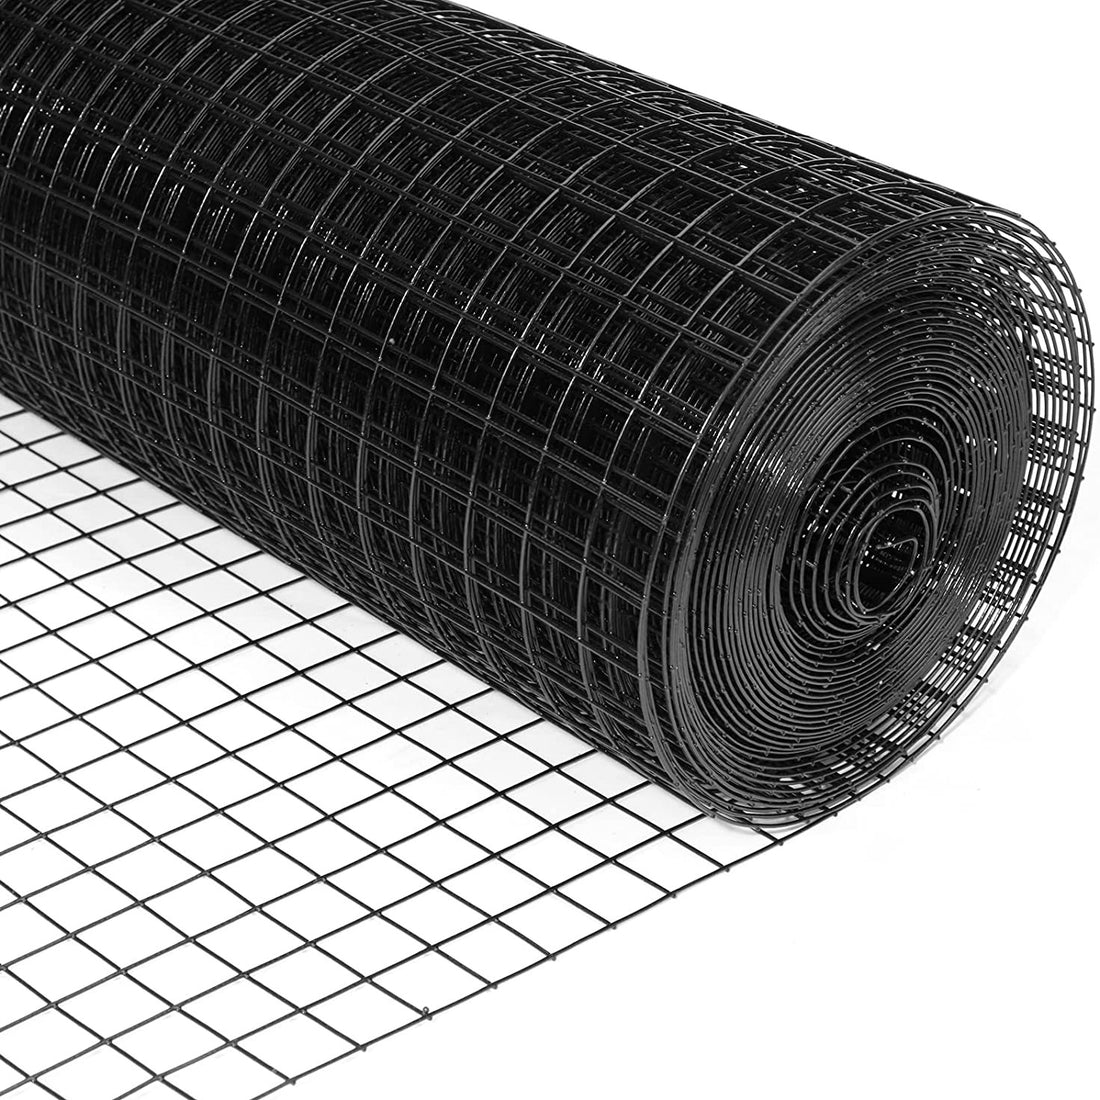 Black Hardware Cloth 15 Gauge 24" x 100' Vinyl Coated and Galvanized Alloy Steel Wire Mesh Roll, 1:1inch Chicken Wire Fencing Mesh, Wire Fence Roll for Garden Pet/Poultry Enclosures Protection